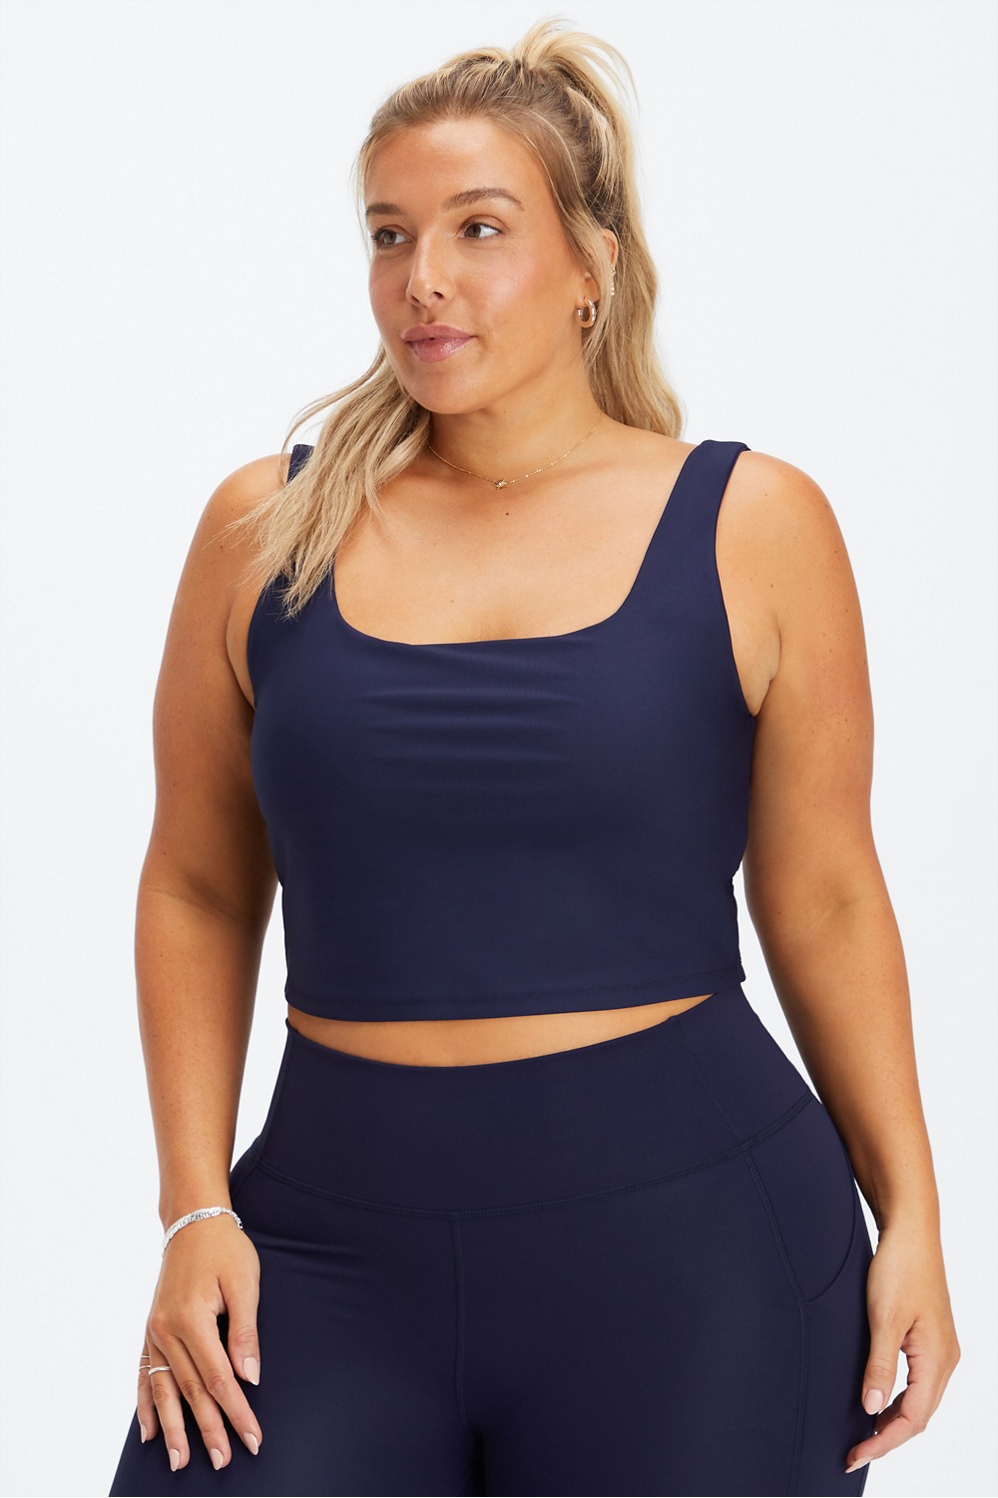 Fabletics NWT Lydia Built-In Bra Tank Grizzly Brown Size 2X - $40